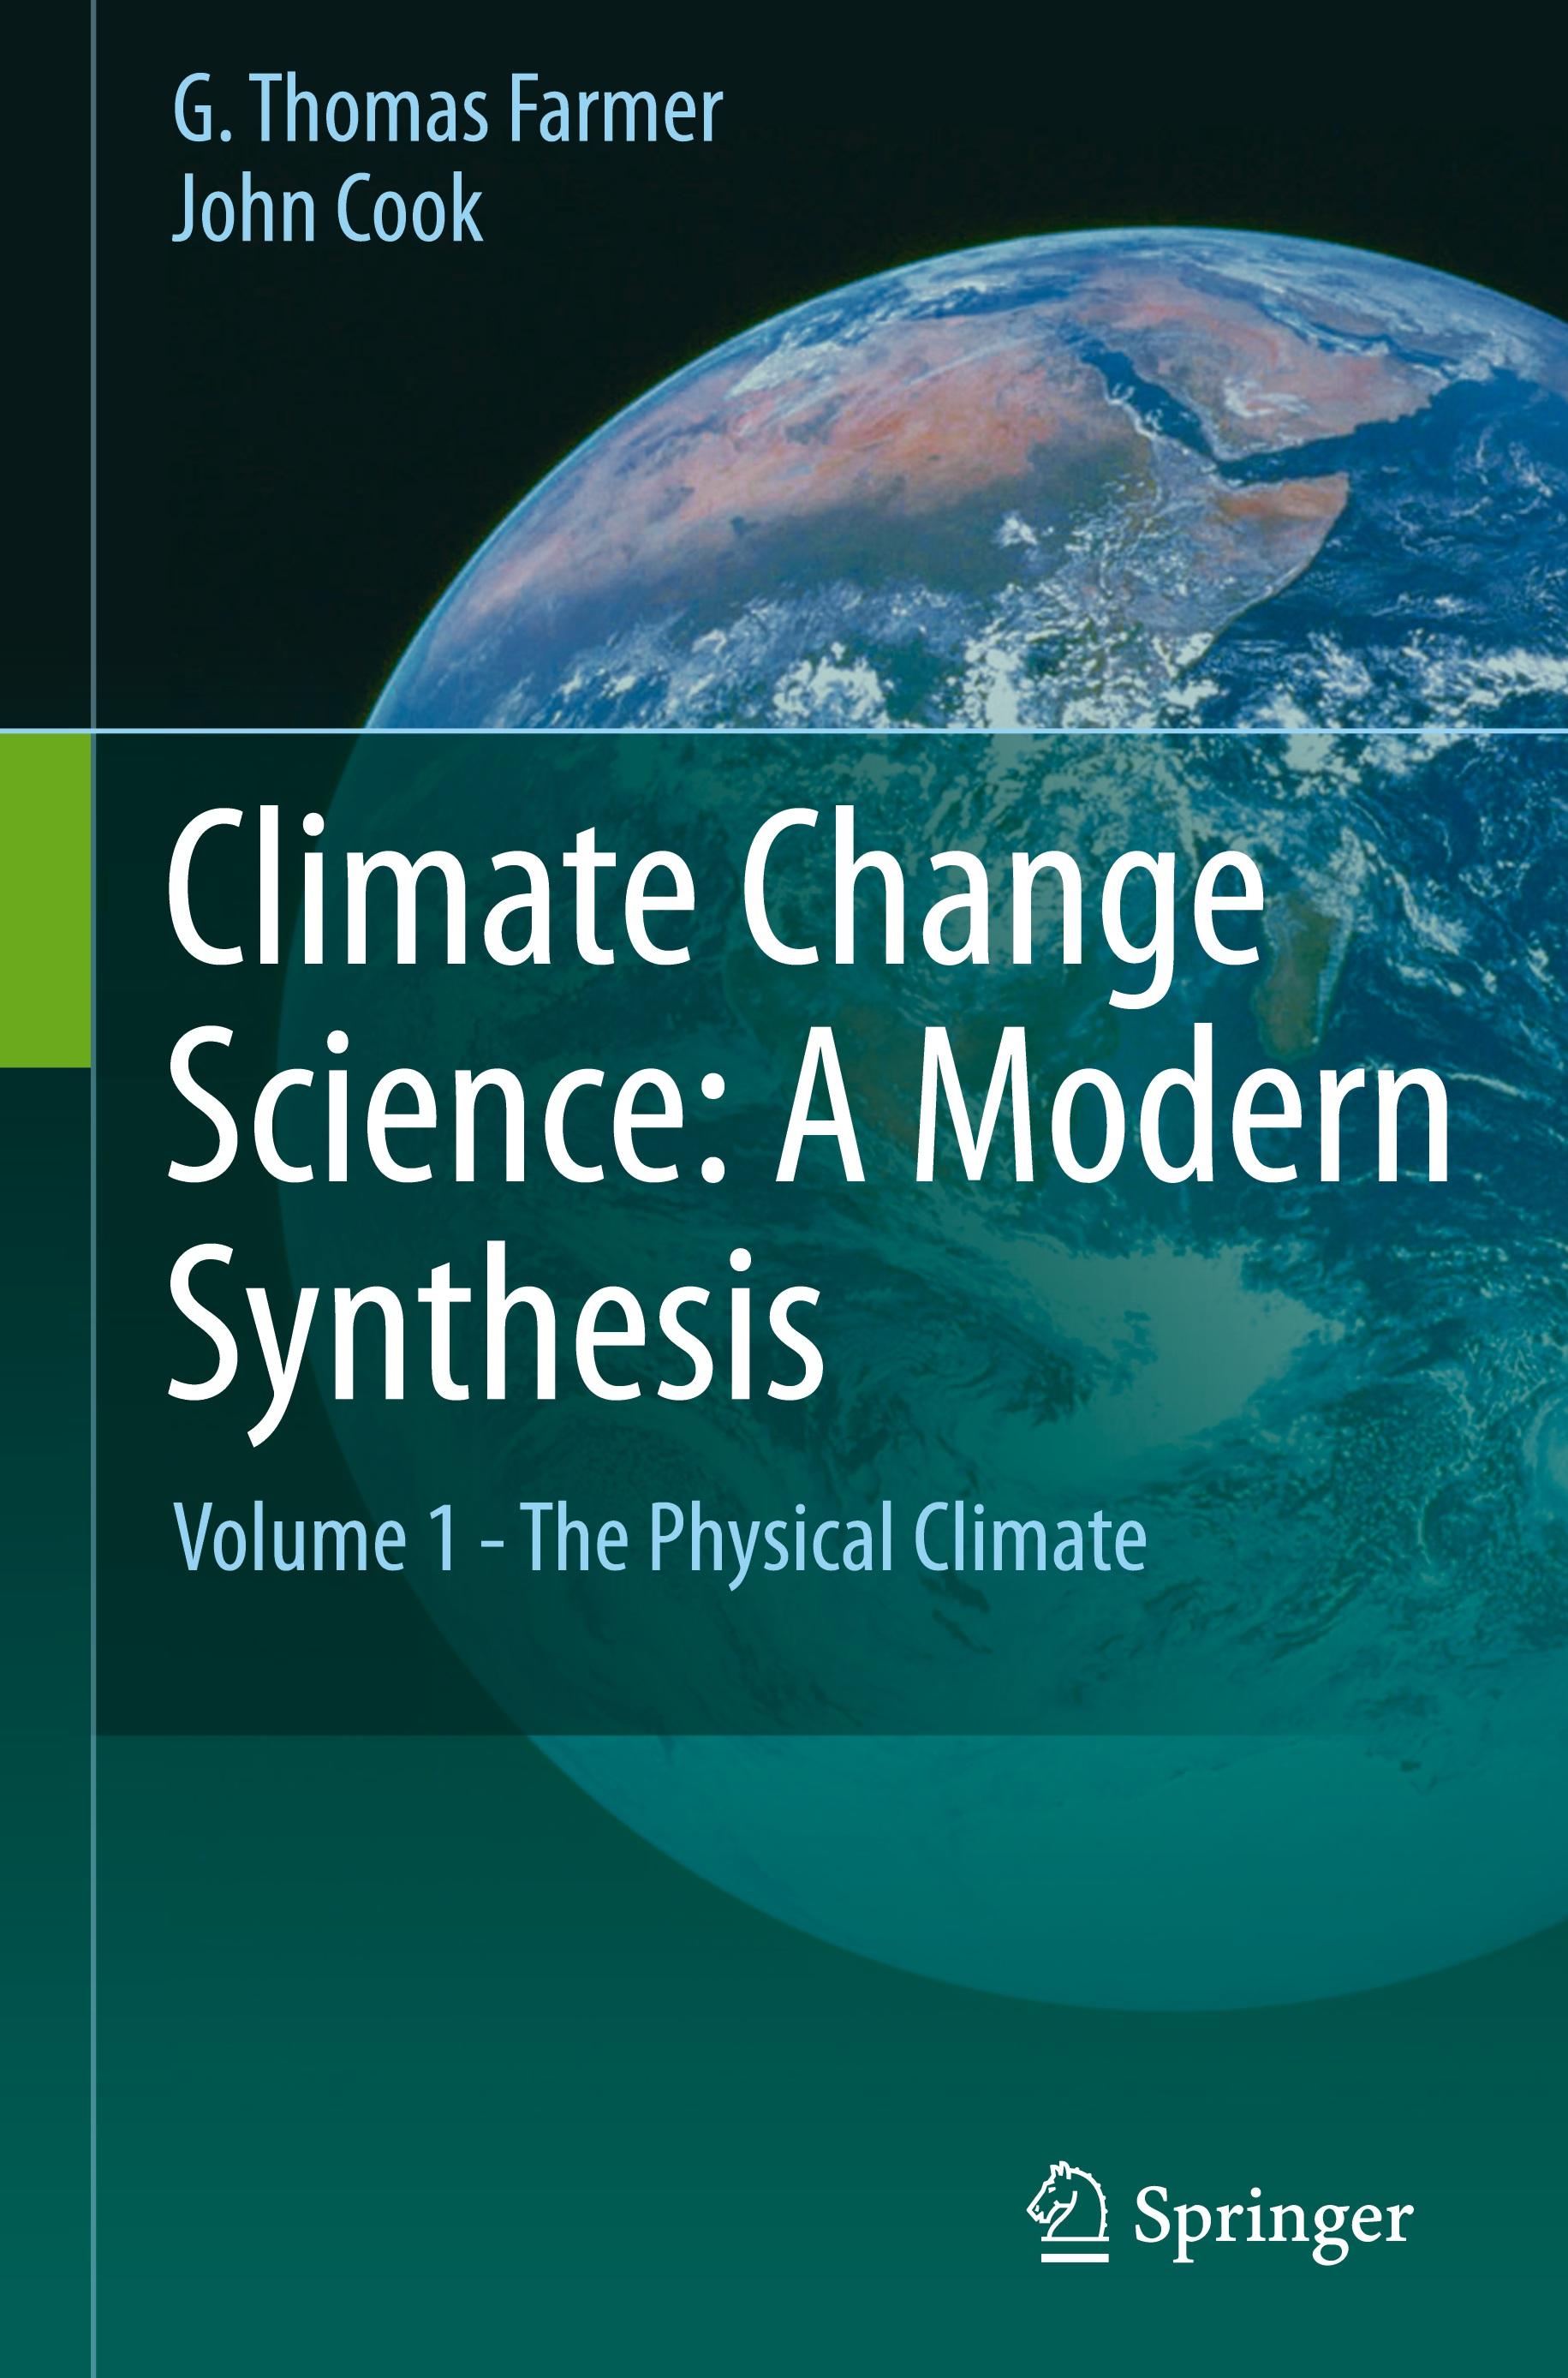 Climate Change Science: A Modern Synthesis - G. Thomas Farmer|John Cook